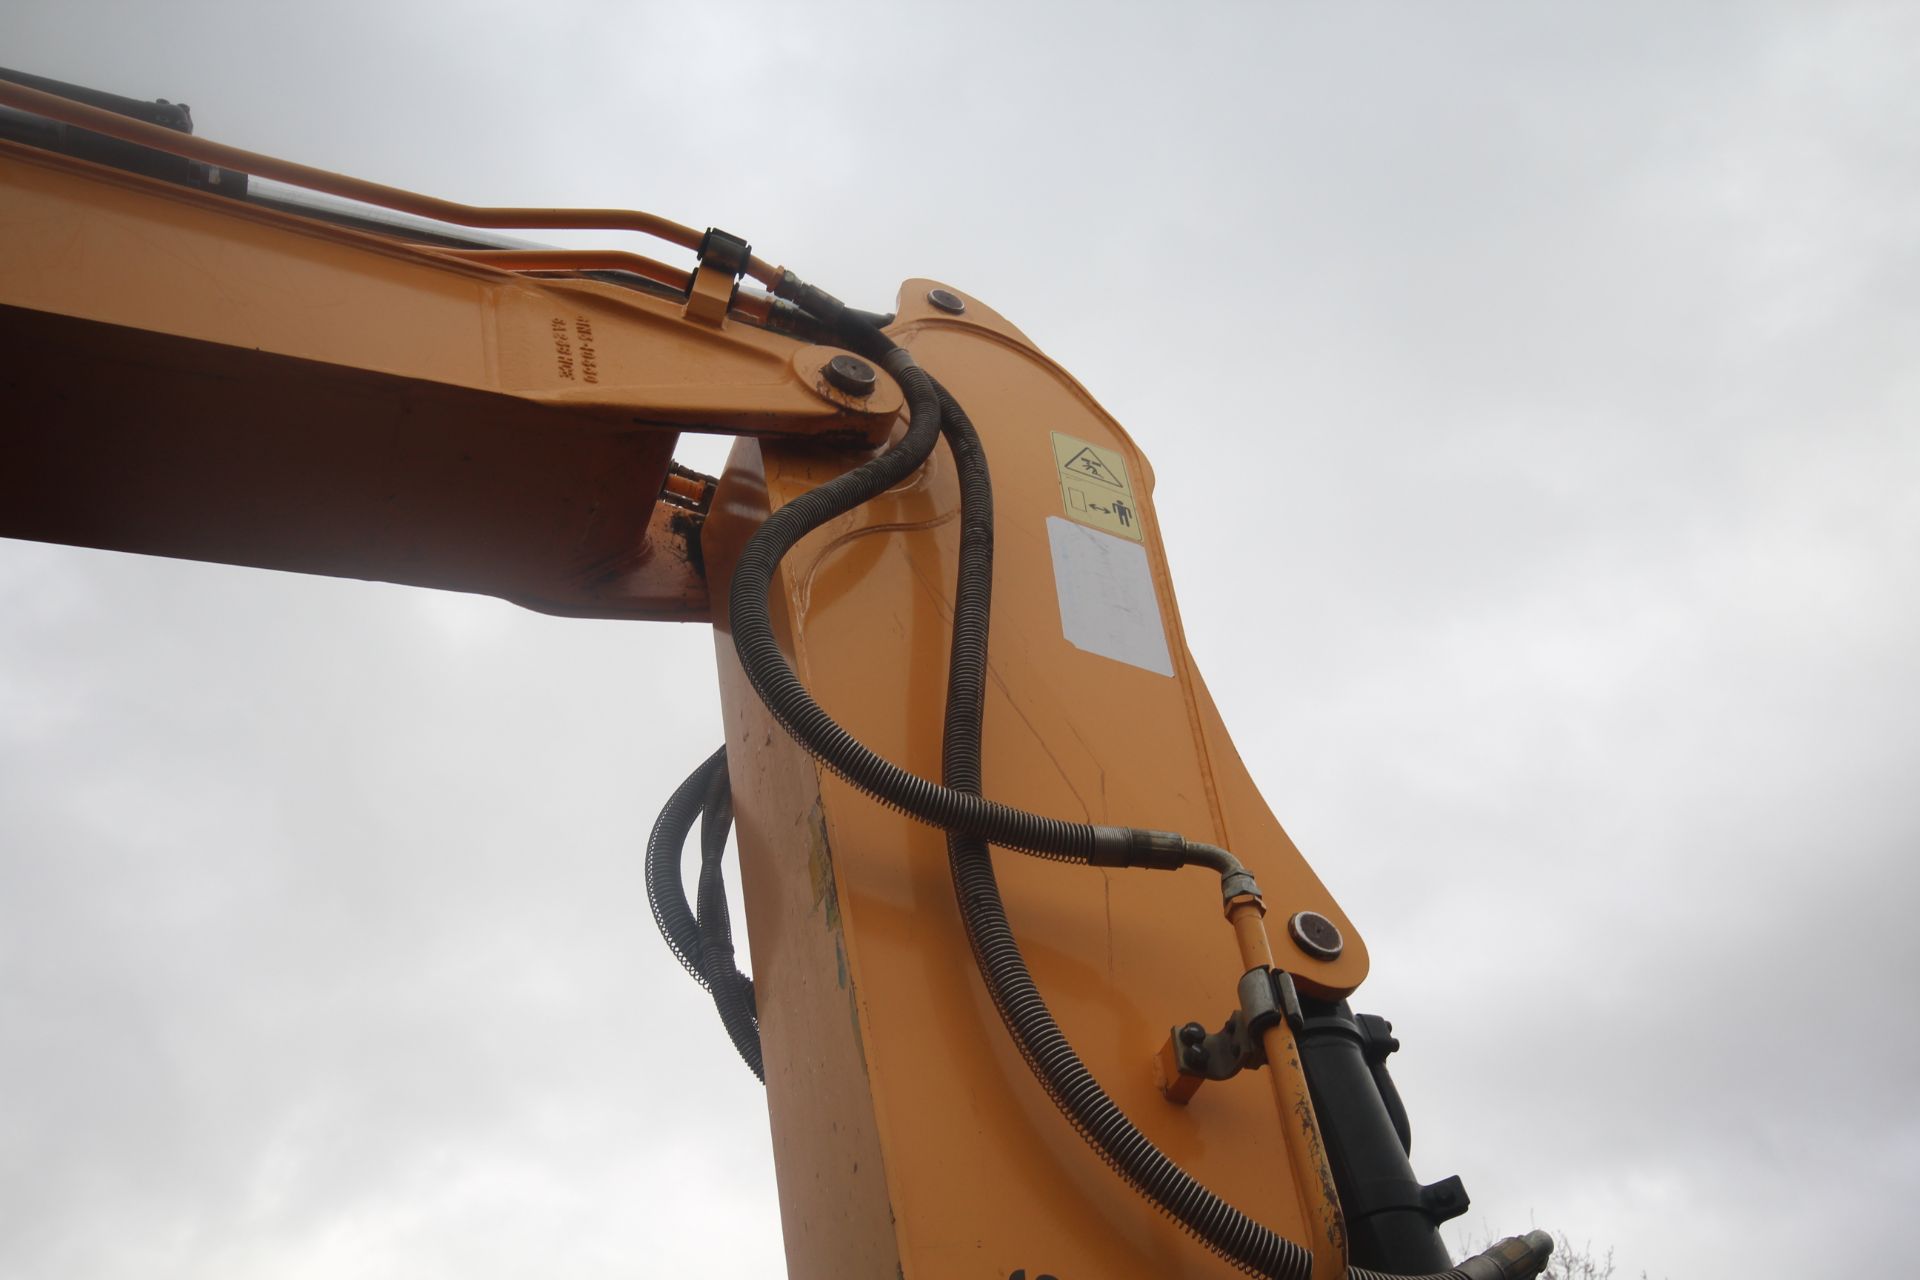 **CATALOGUE CHNAGE** Hyundai HX130 LCR 13T steel track excavator. 2018. c. 5,150 hours. Serial - Image 38 of 77